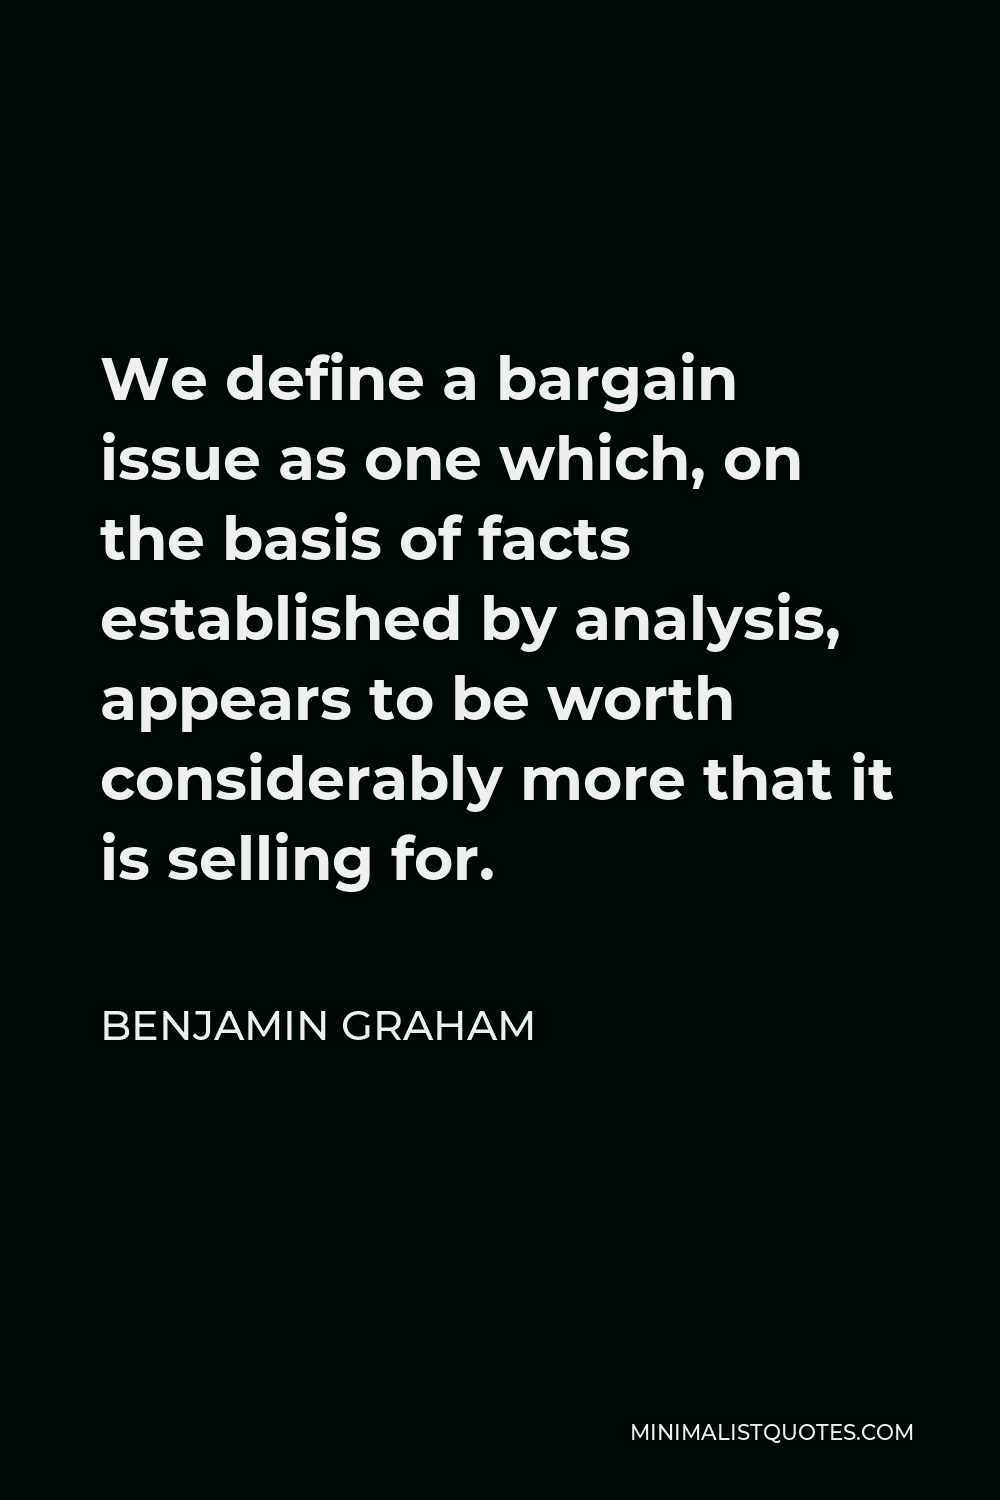 Benjamin Graham Quote - We define a bargain issue as one which, on the basis of facts established by analysis, appears to be worth considerably more that it is selling for.